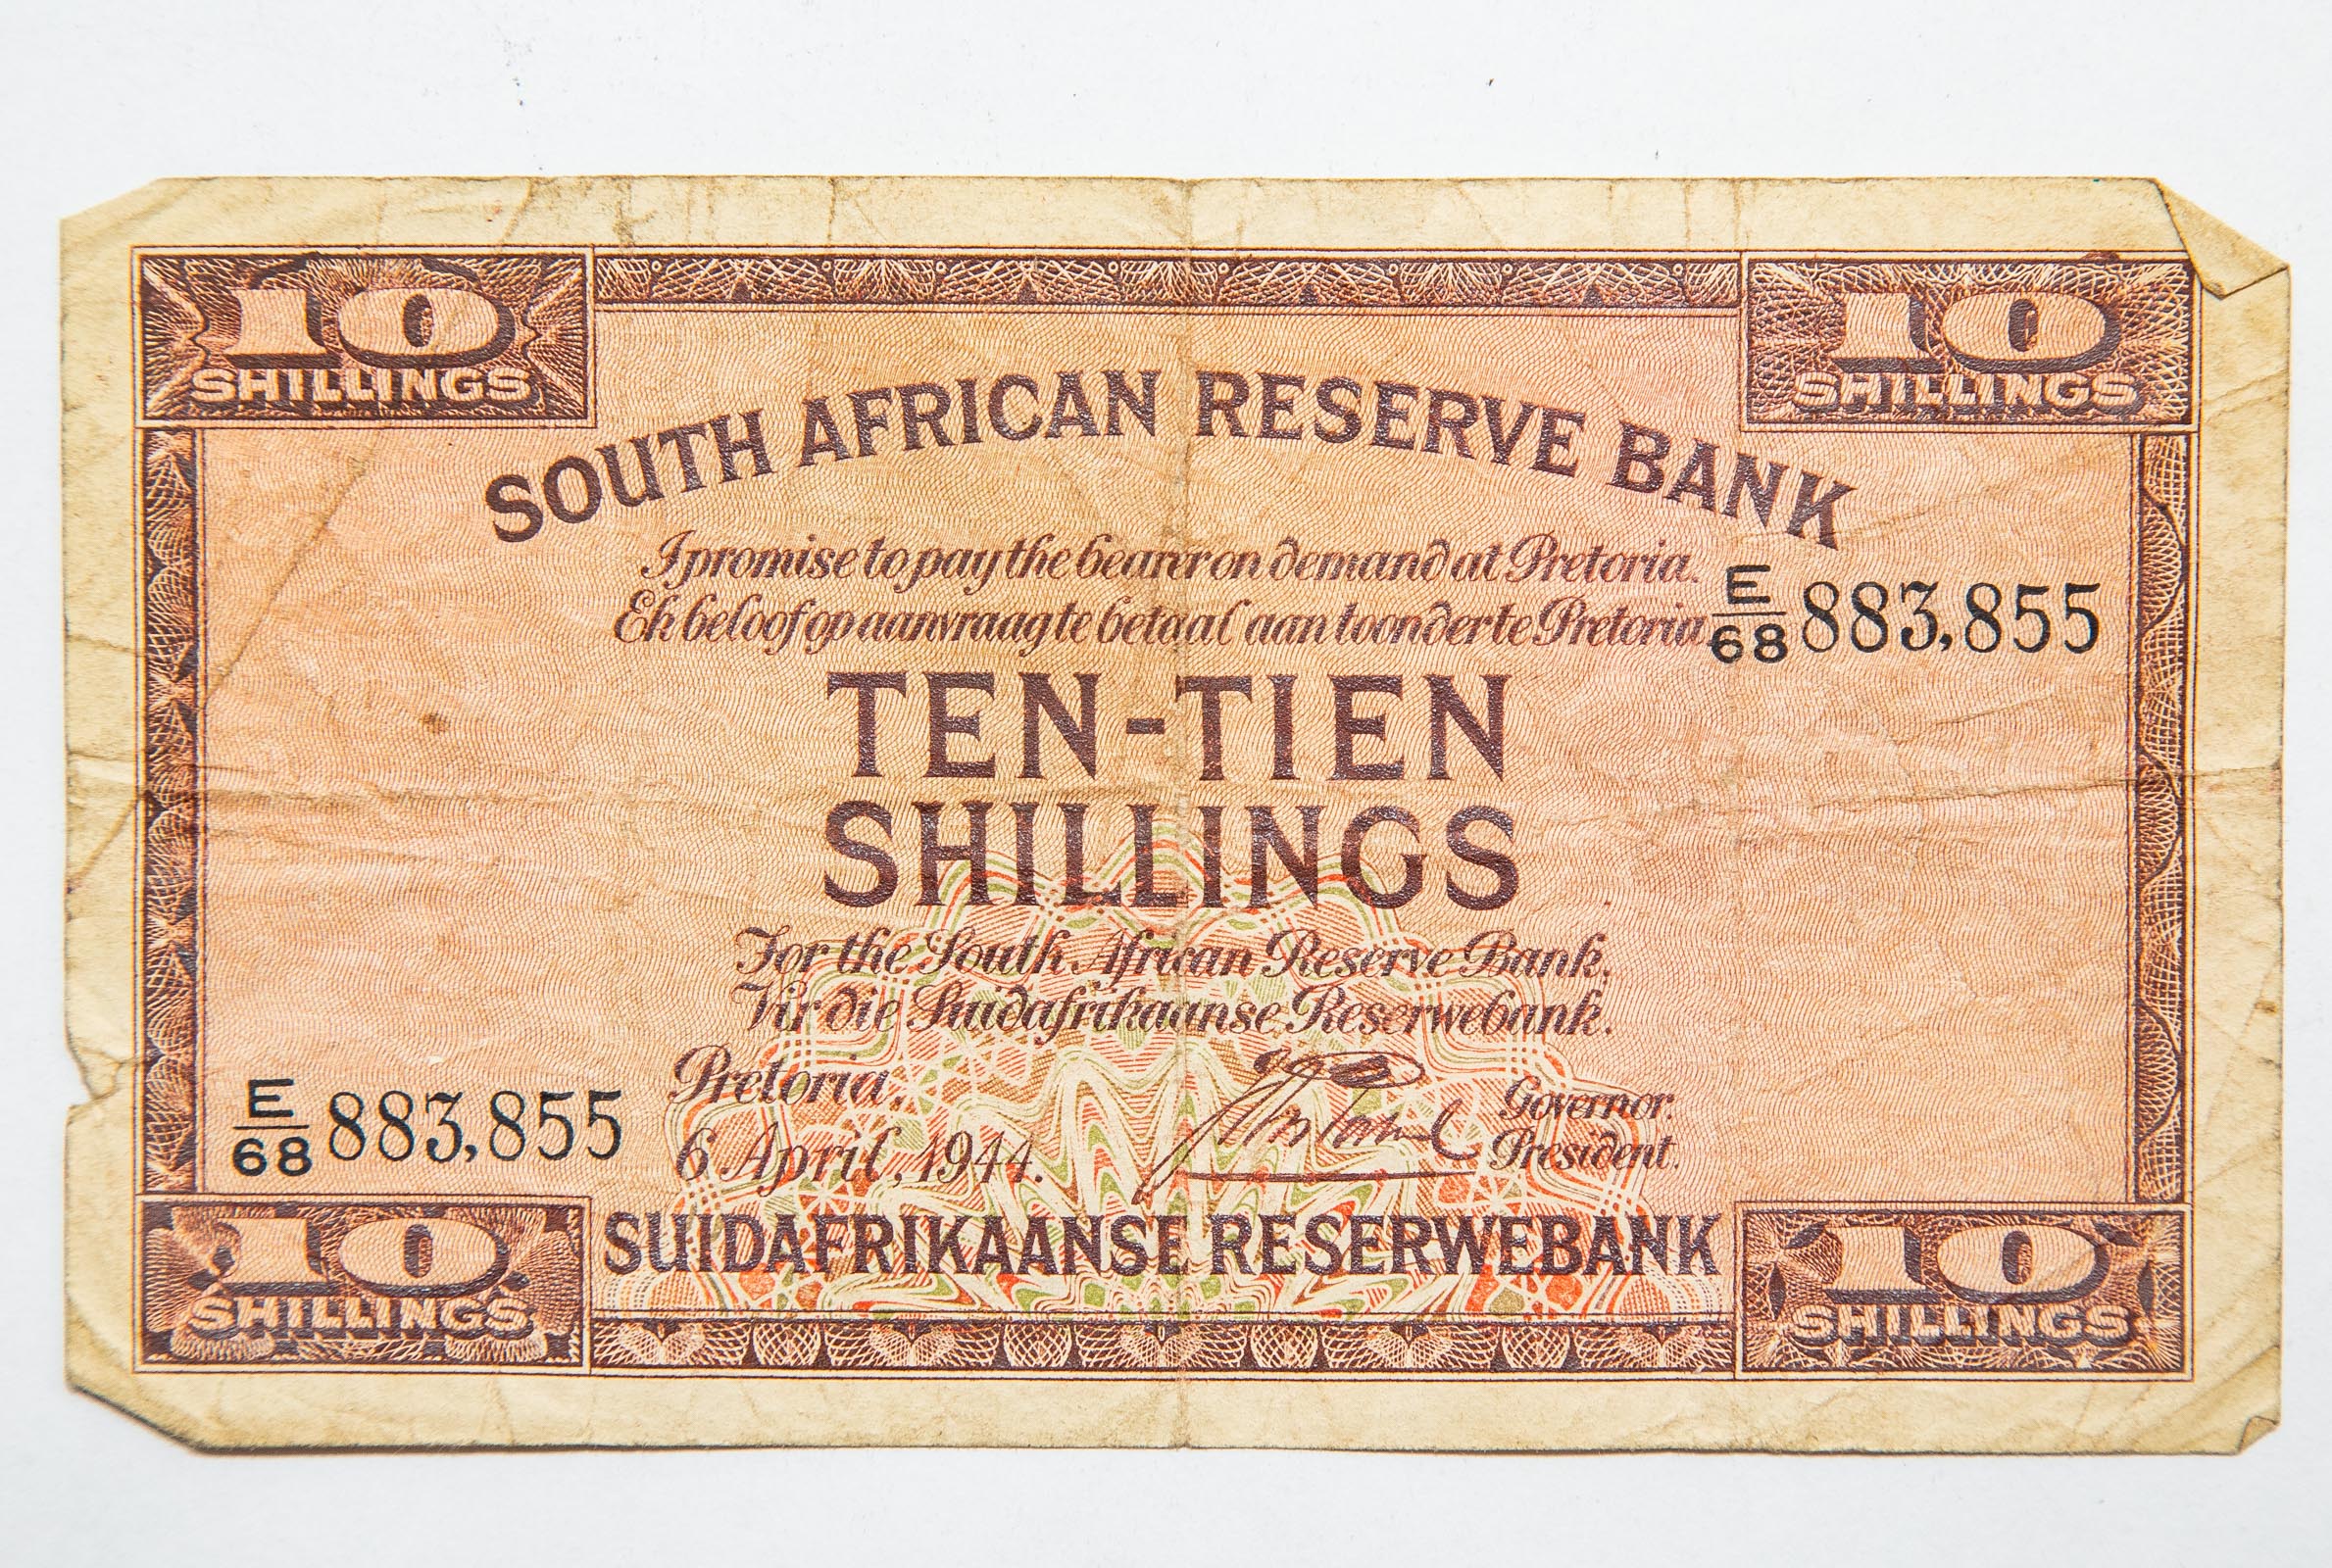 1944 SOUTH AFRICAN RESERVE BANK 337cd7